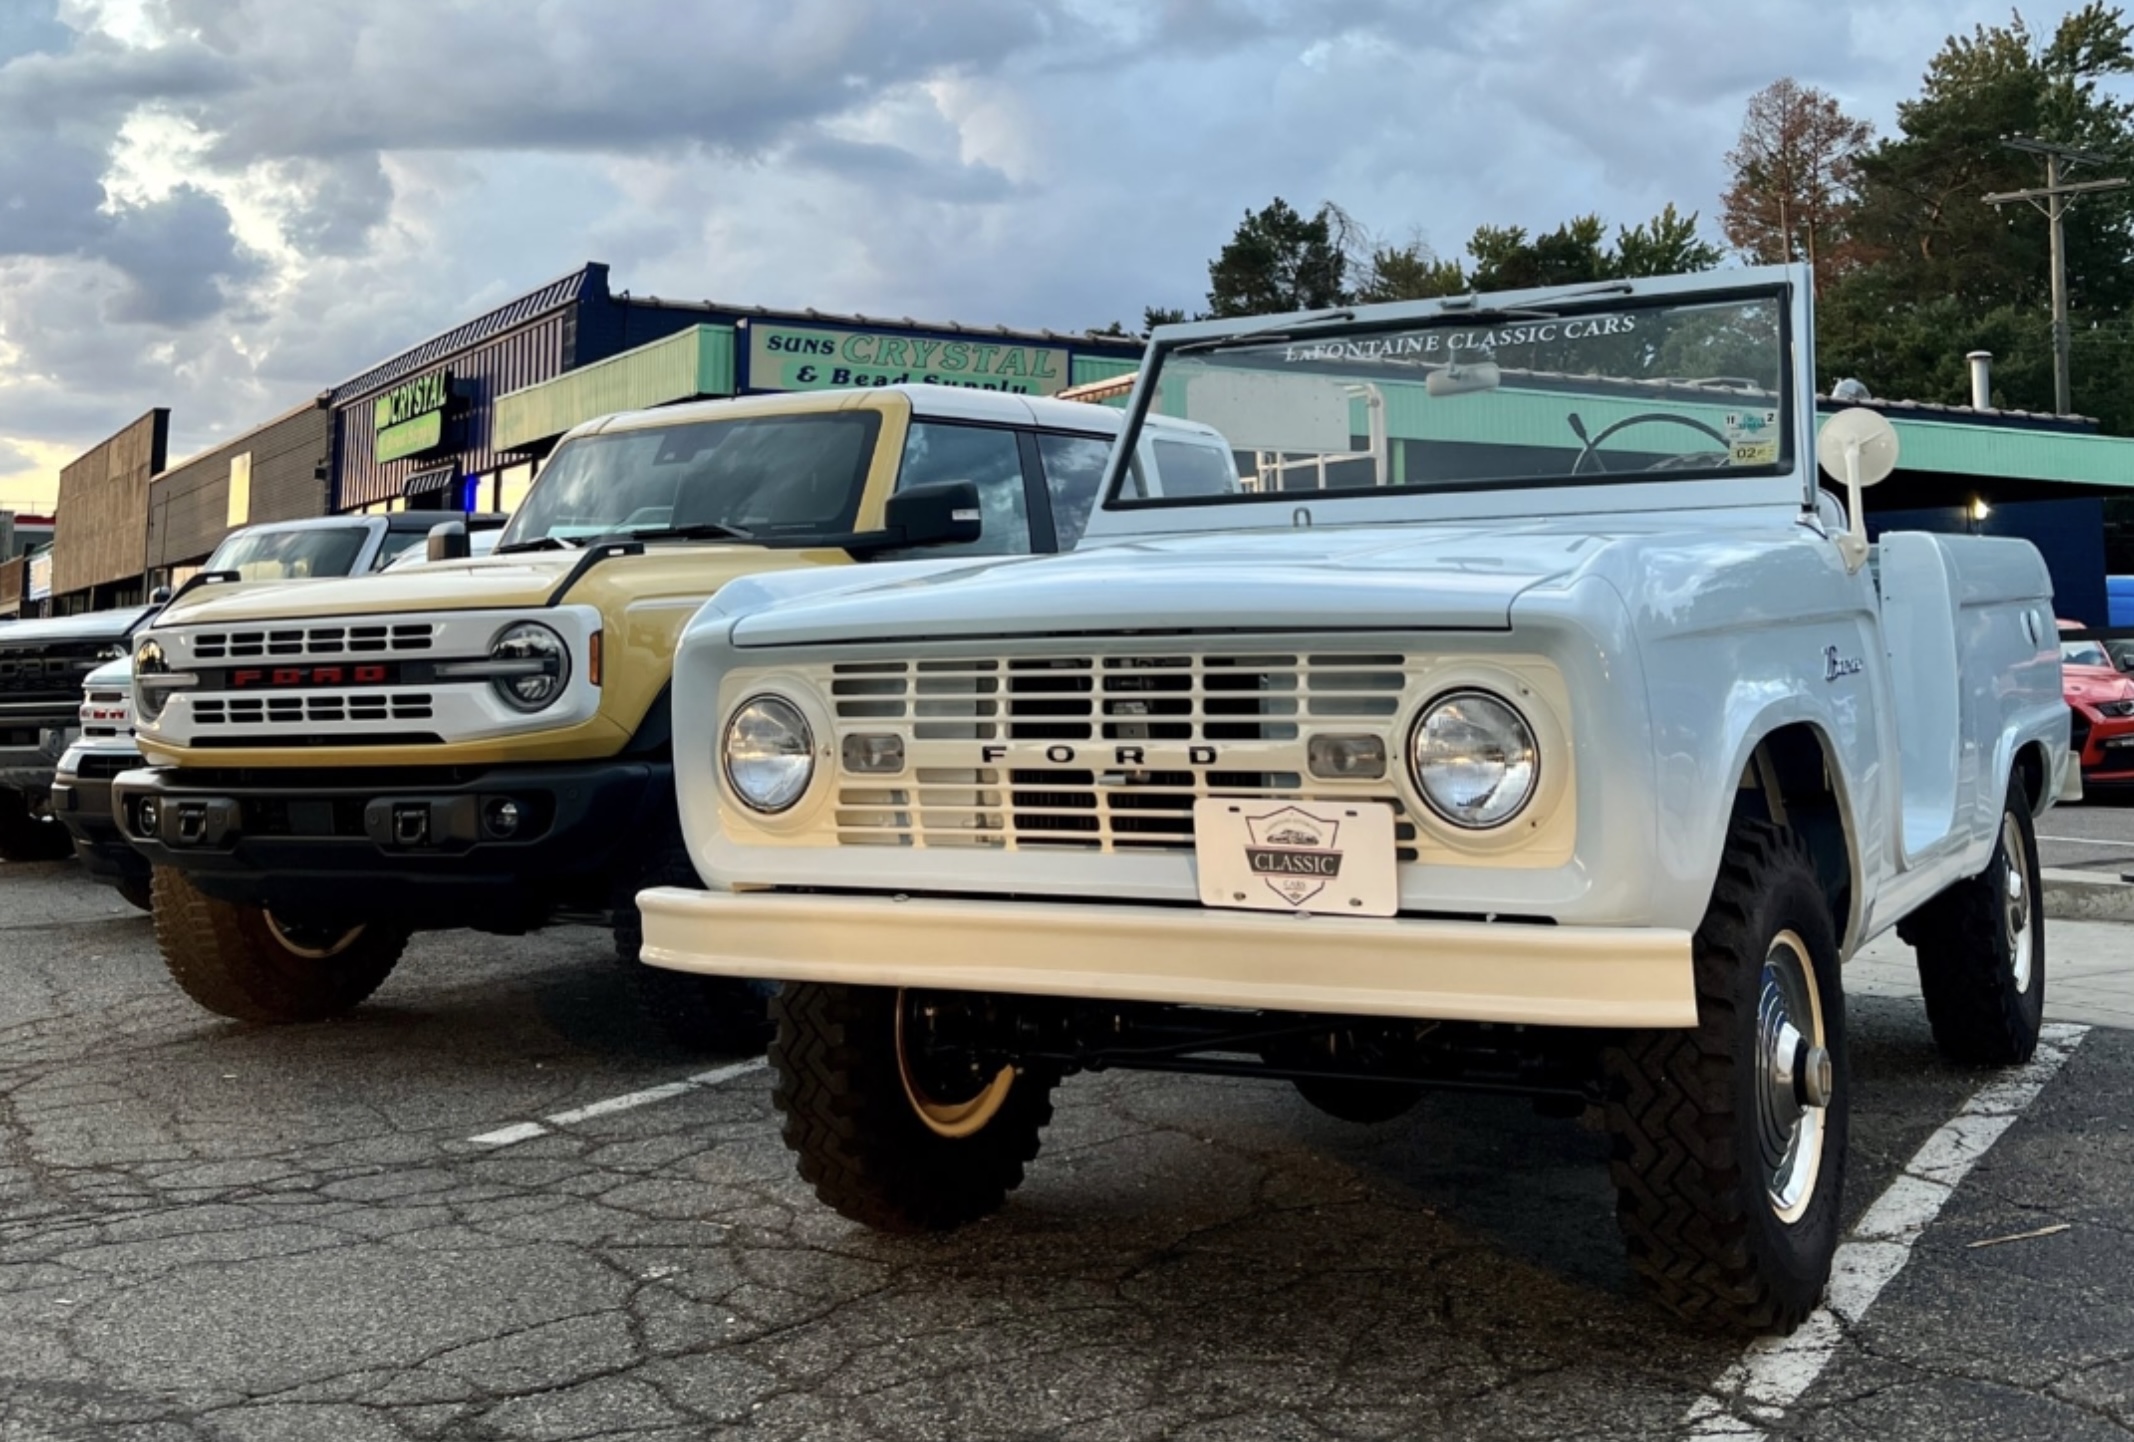 Ford Bronco Heritage Bronco (in Yellowstone Metallic) at Woodward Dream Cruise 1660930249998